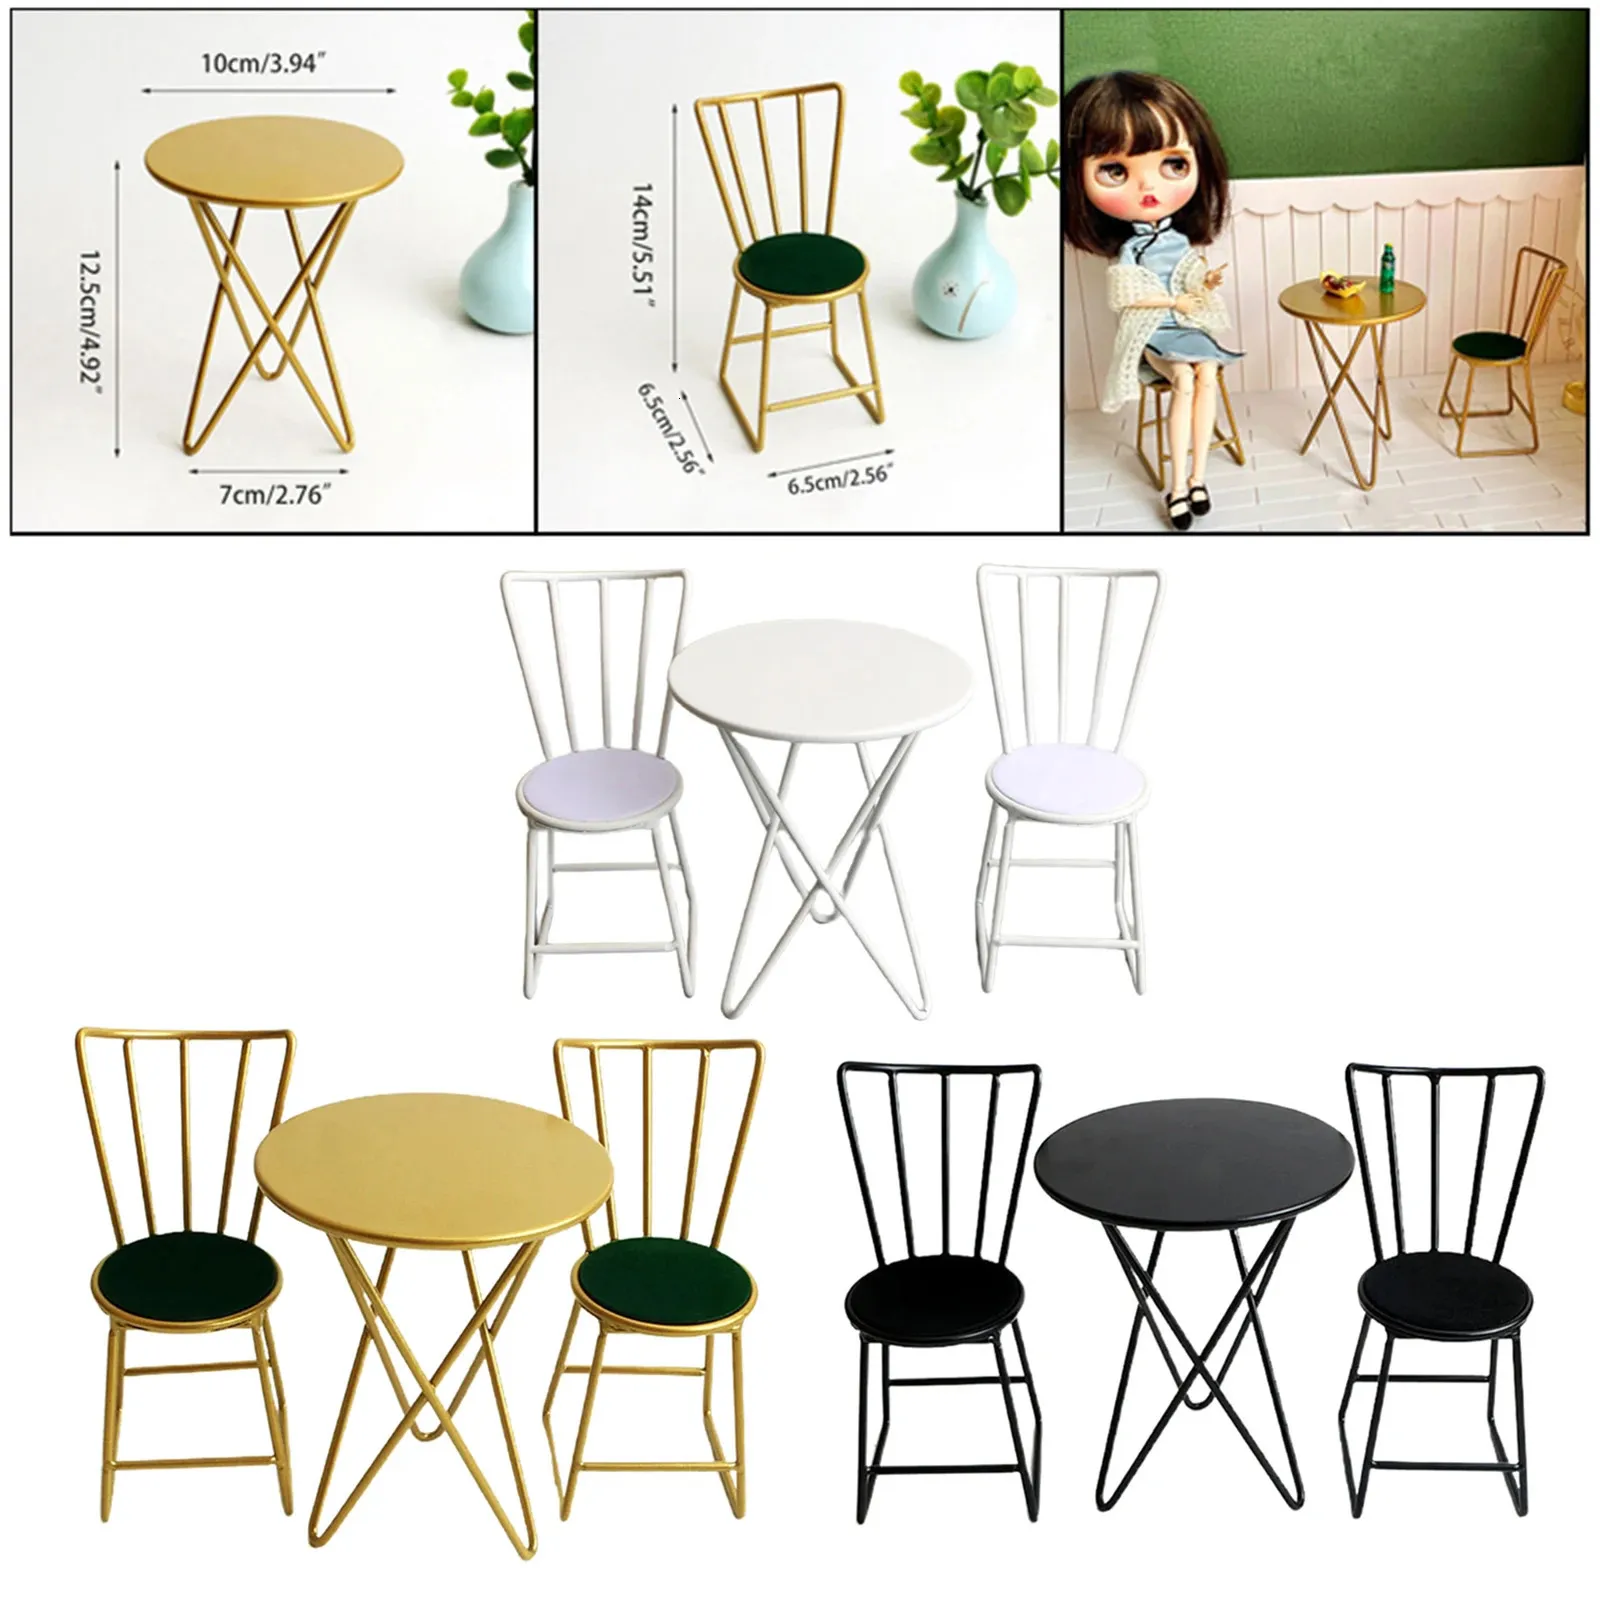 Doll House Accessories 1 6 Metal Dollhouse Miniature Furniture Table Chair Set Decoration Doll Accessories Gift Toys for Kids 30cm Doll For Blyth Barb 231018